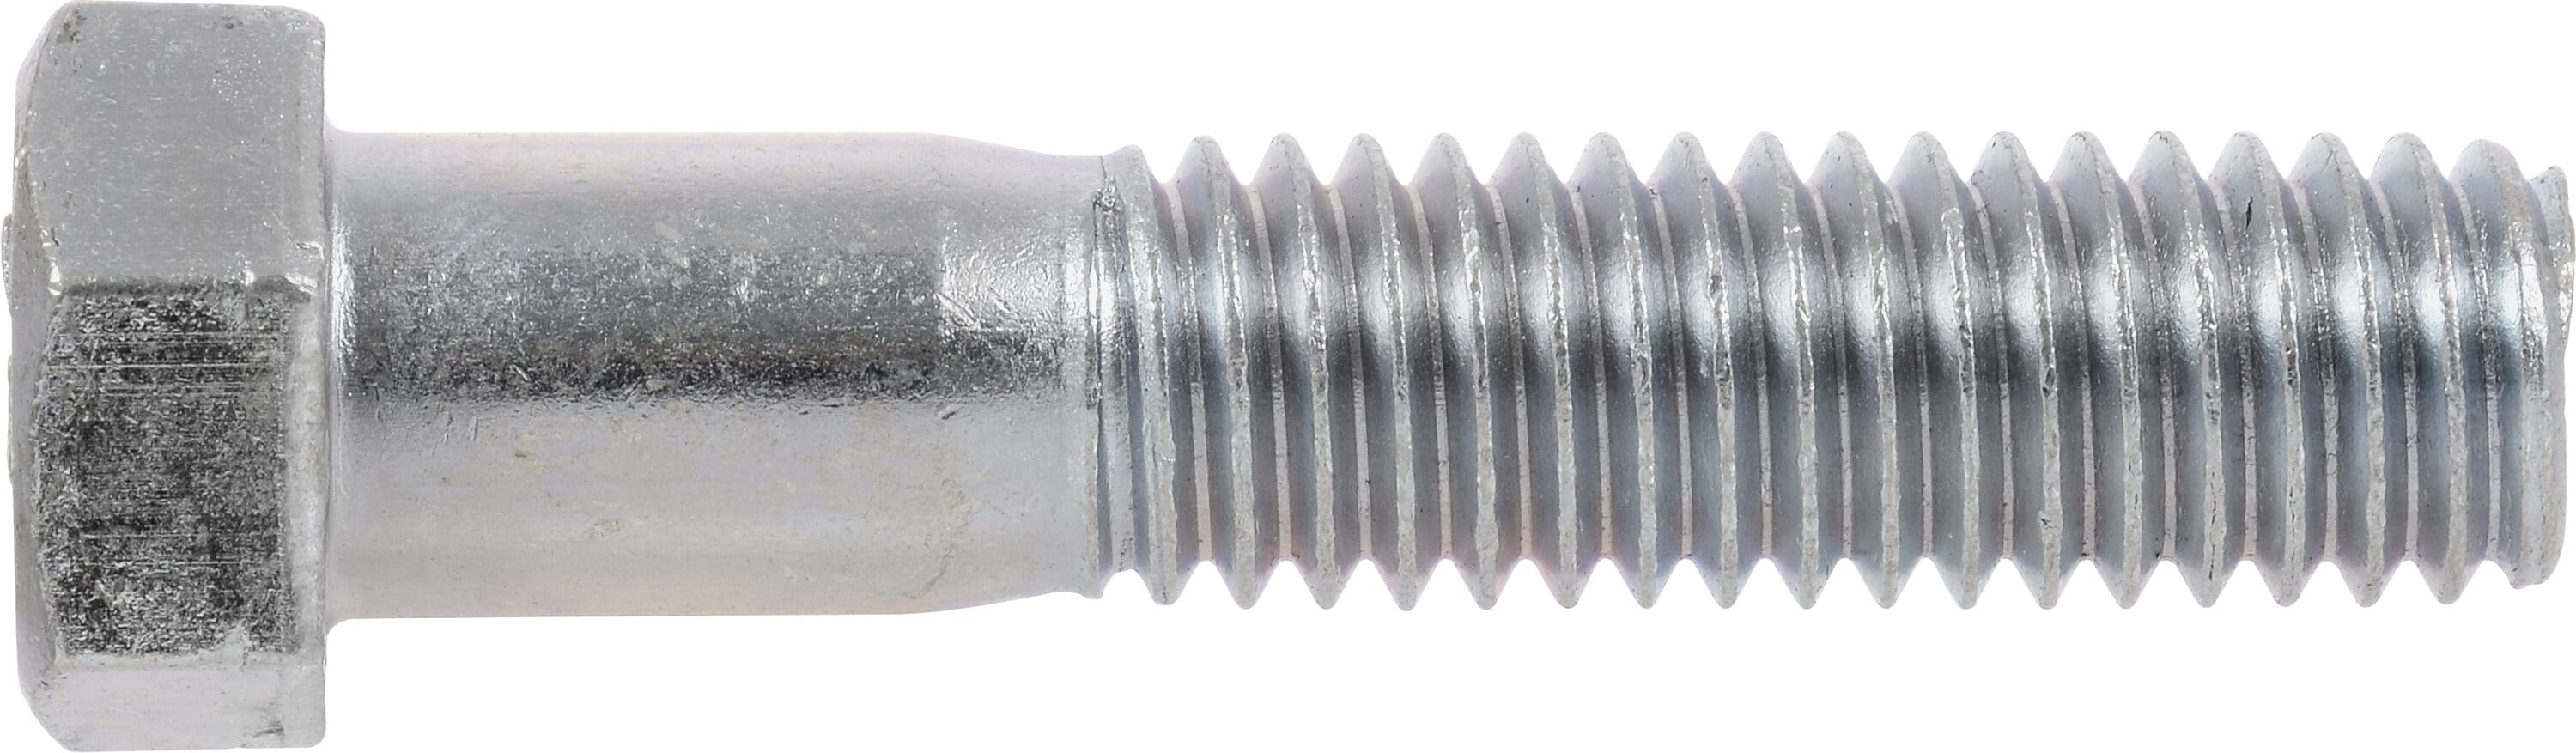 Hillman 5/16-in x 8-in Zinc-Plated Coarse Thread Hex Bolt at Lowes.com